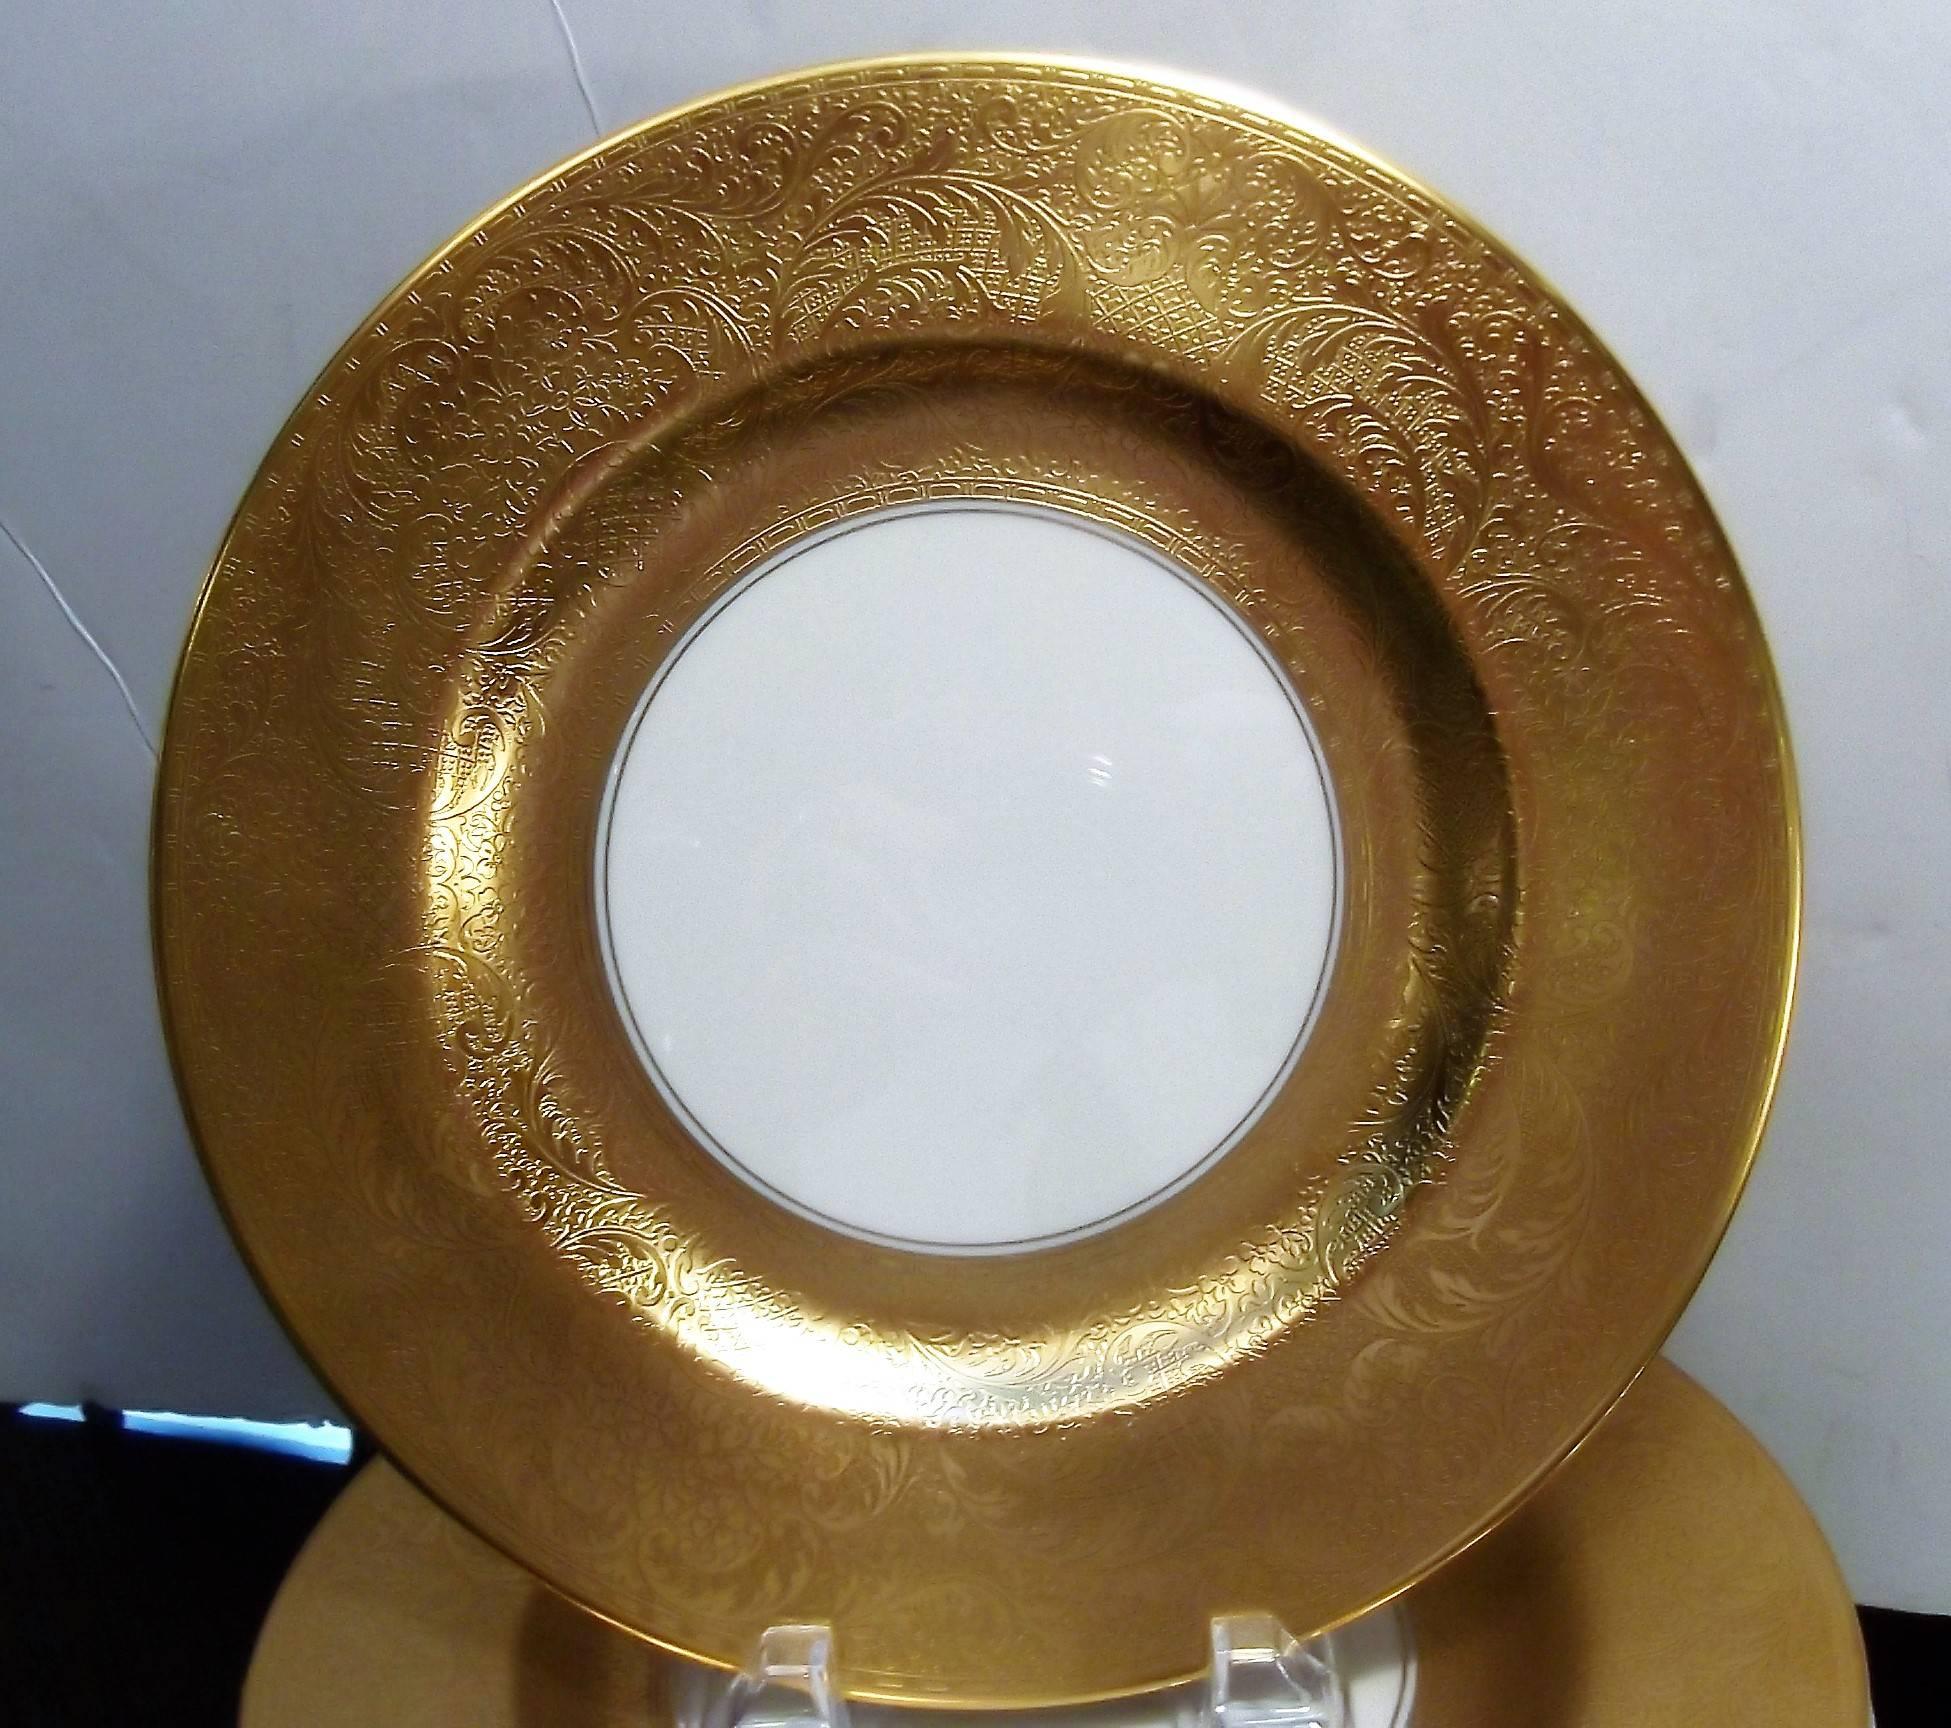 Lavish thick gold border service plates by Pickard. The luxurious borders are beautifully textured and over simple and Classic white China. A perfect set of 14. Diameter 10.5